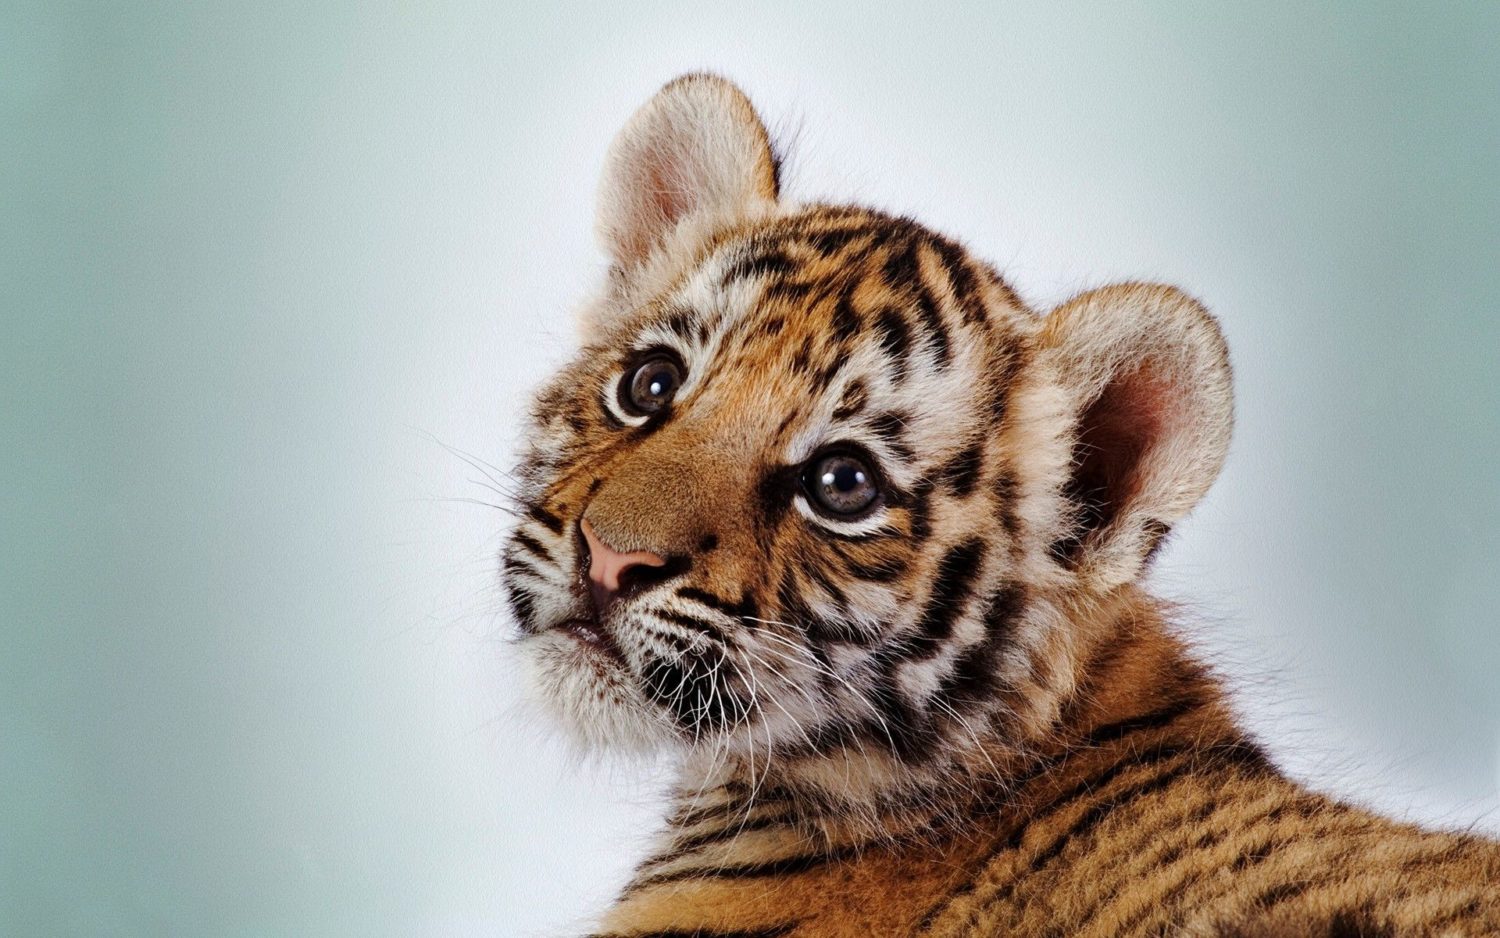 A baby tiger looking behind at the camera with a puppy dog face